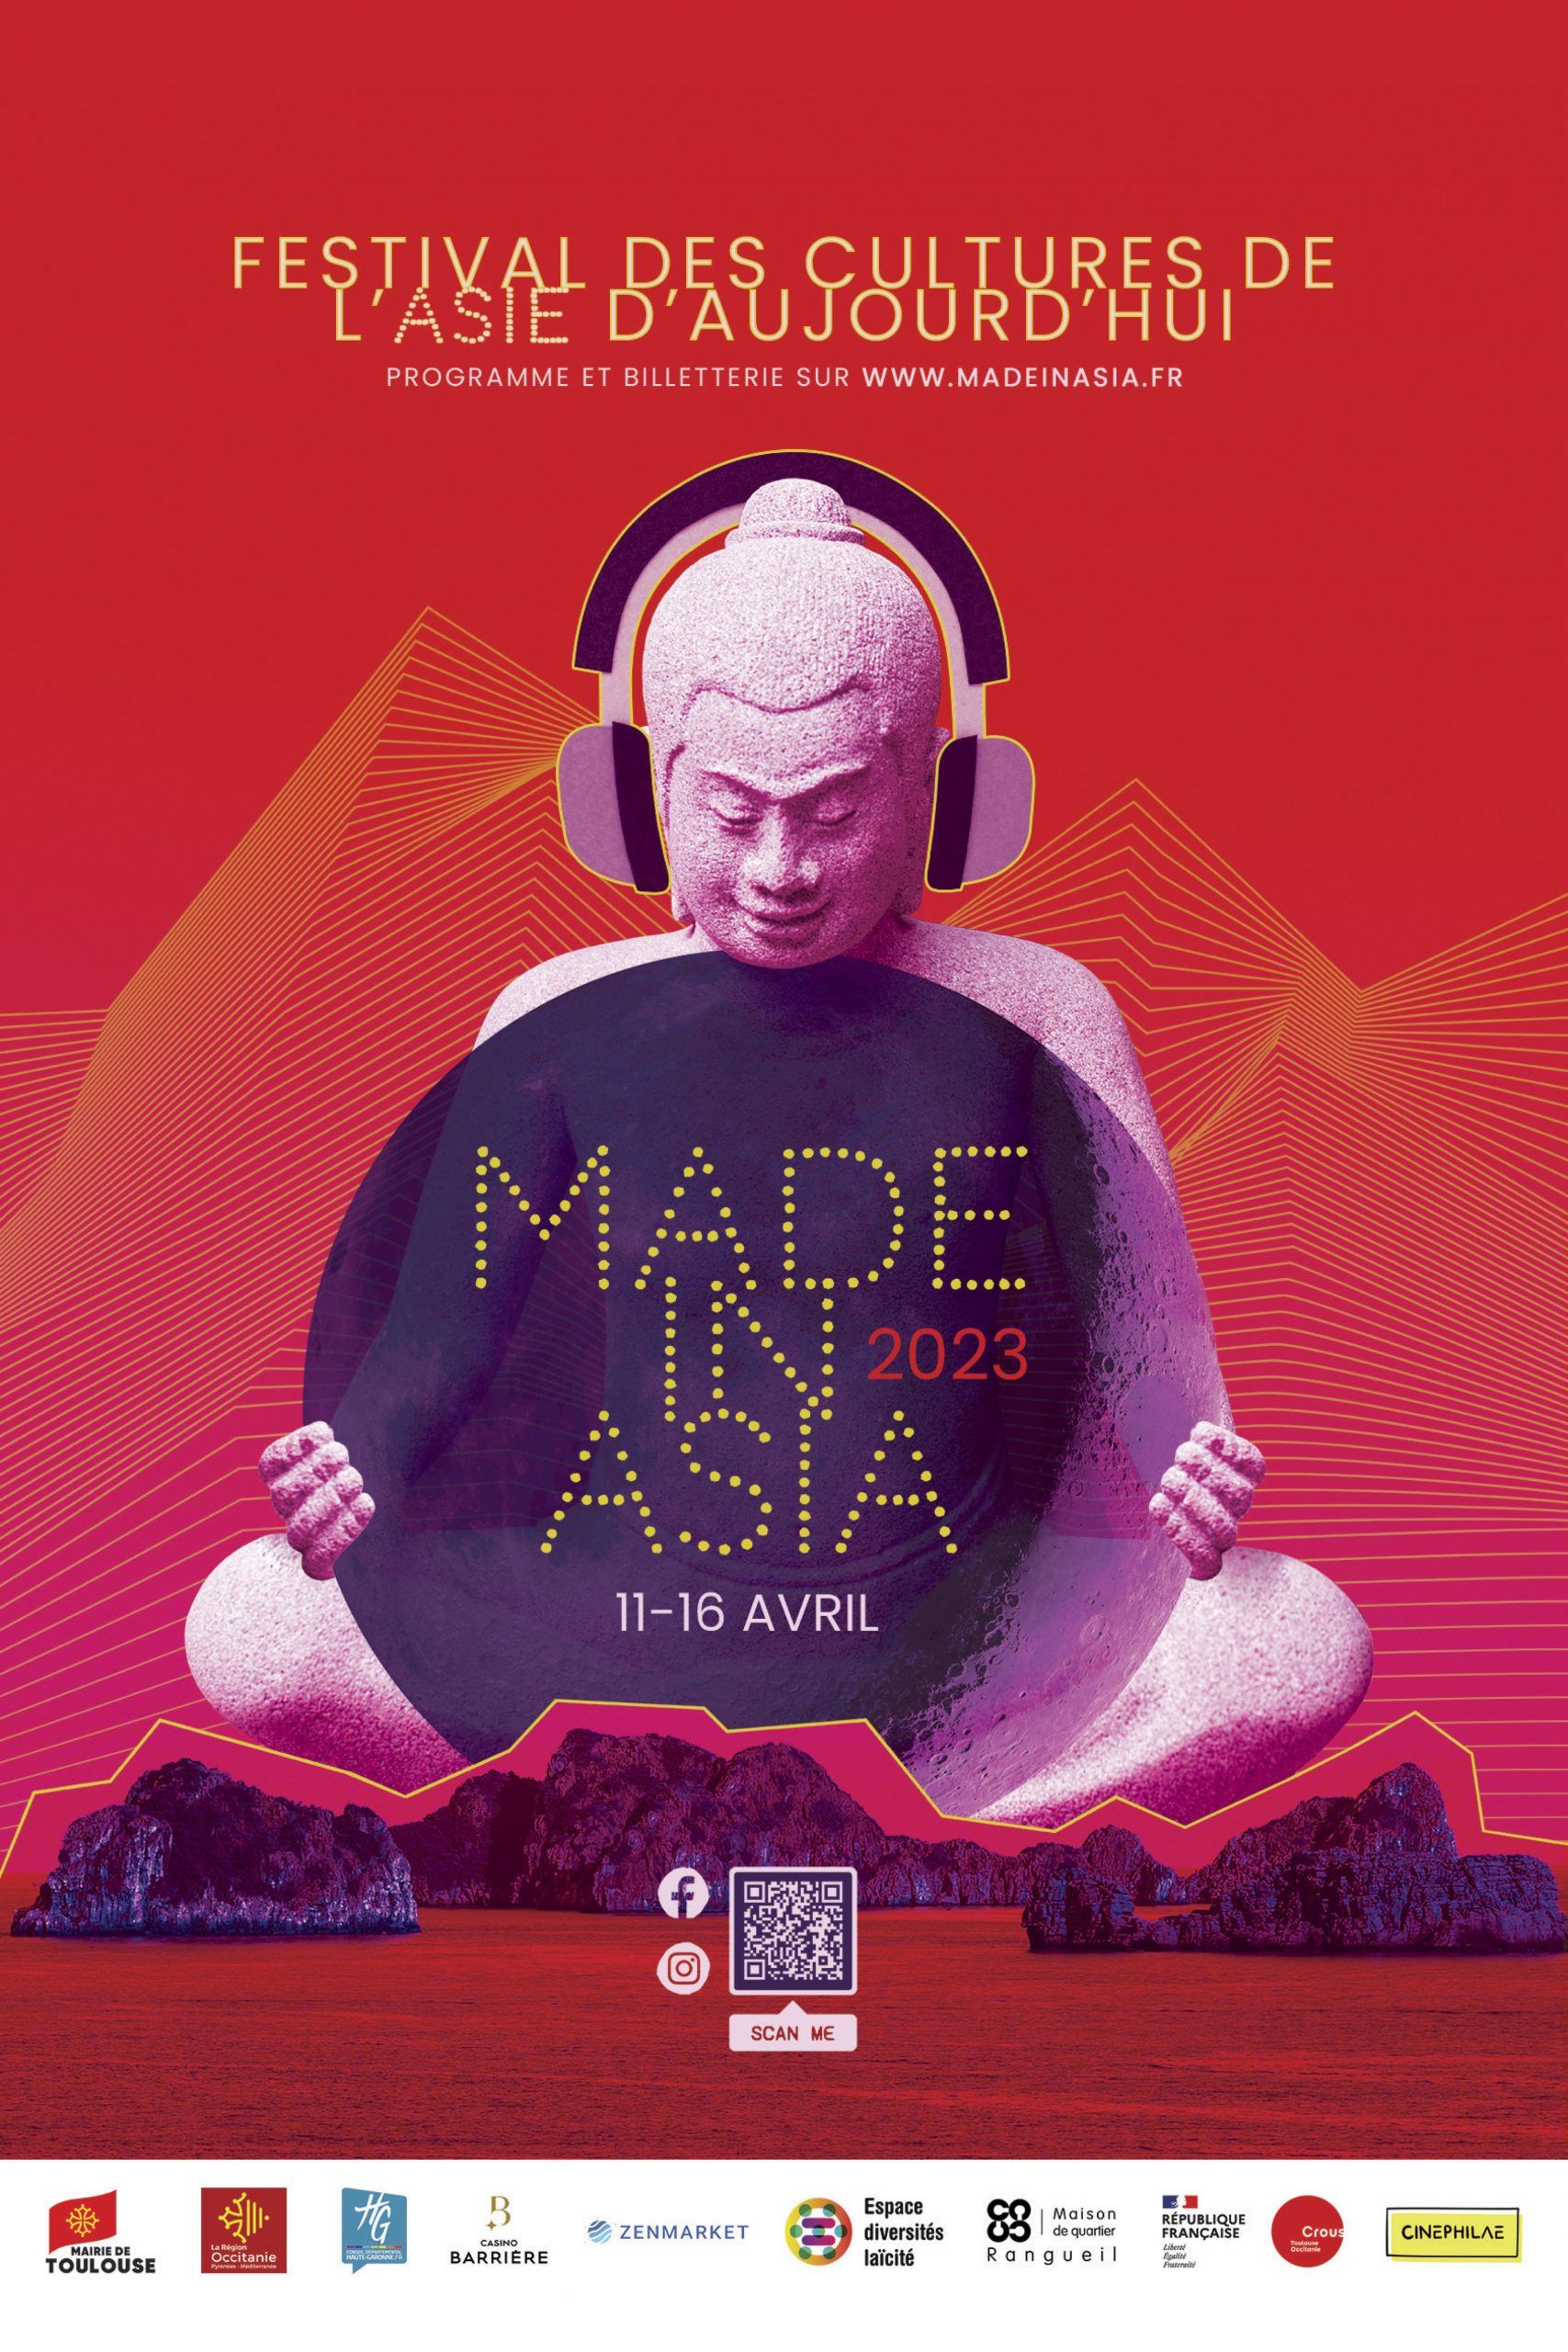 Made in Asia - Edition 2023